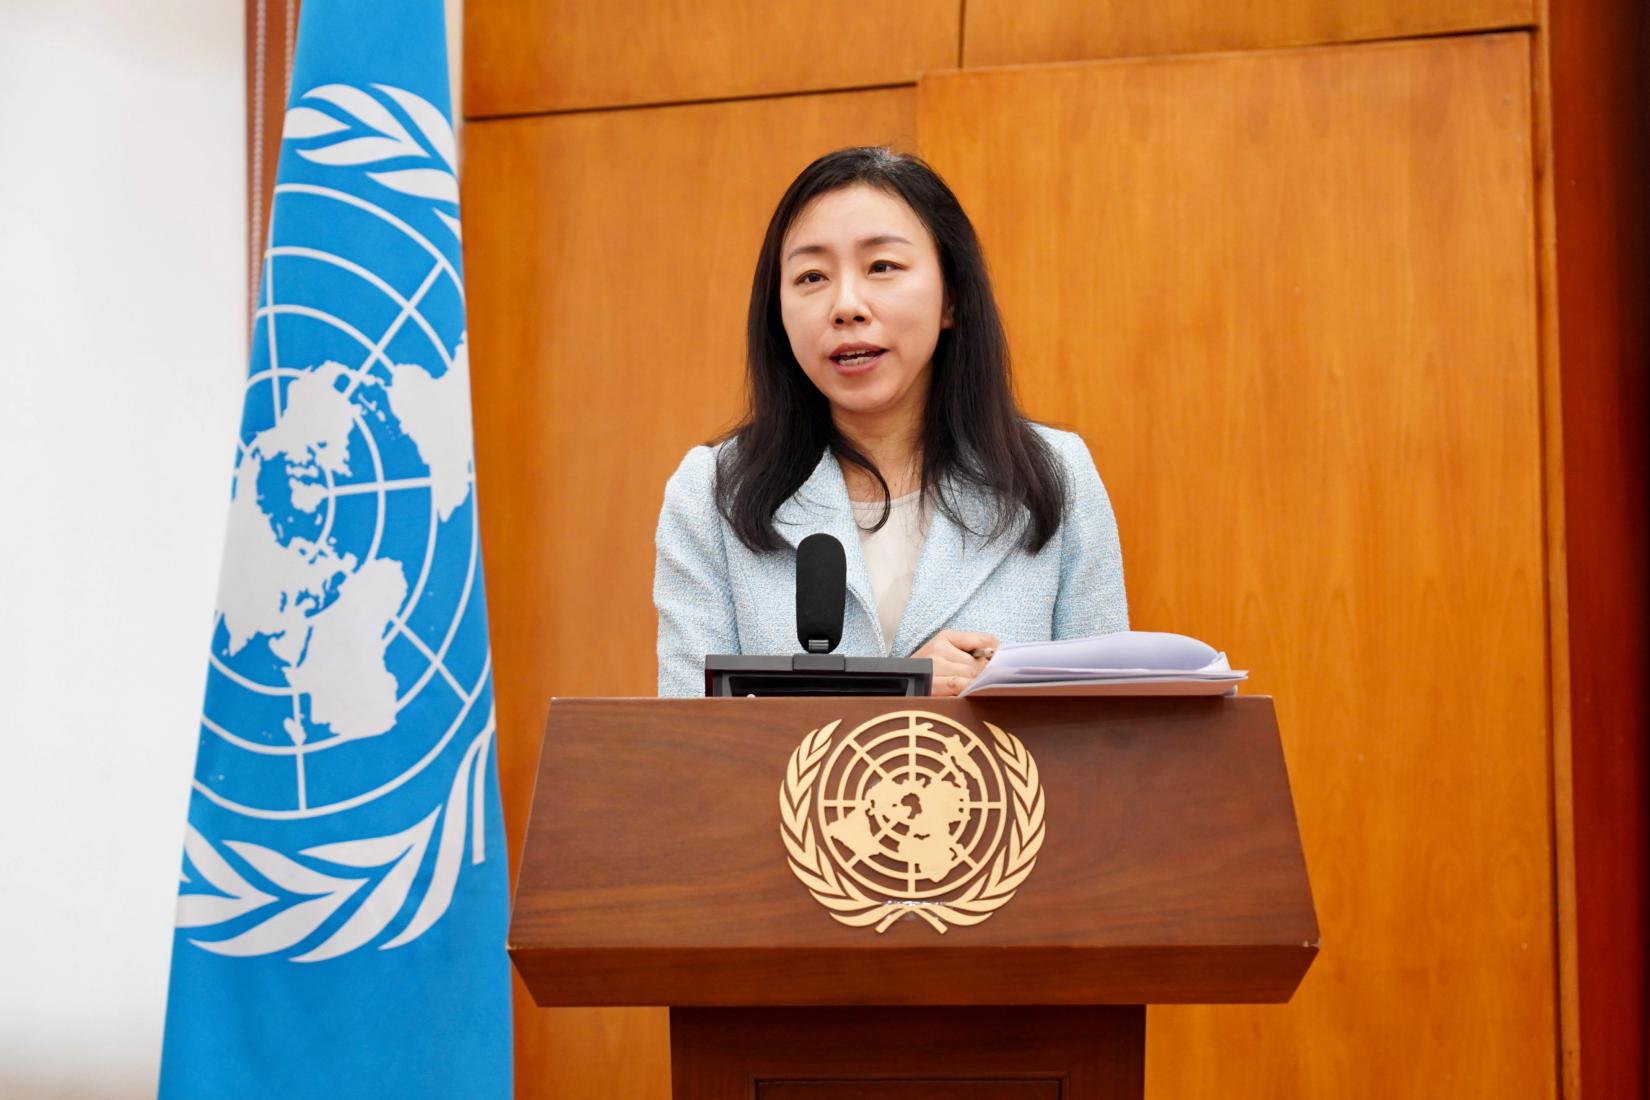 Tang Ying, Director-General of the Global Development Promotion Center of the China International Development Cooperation Agency